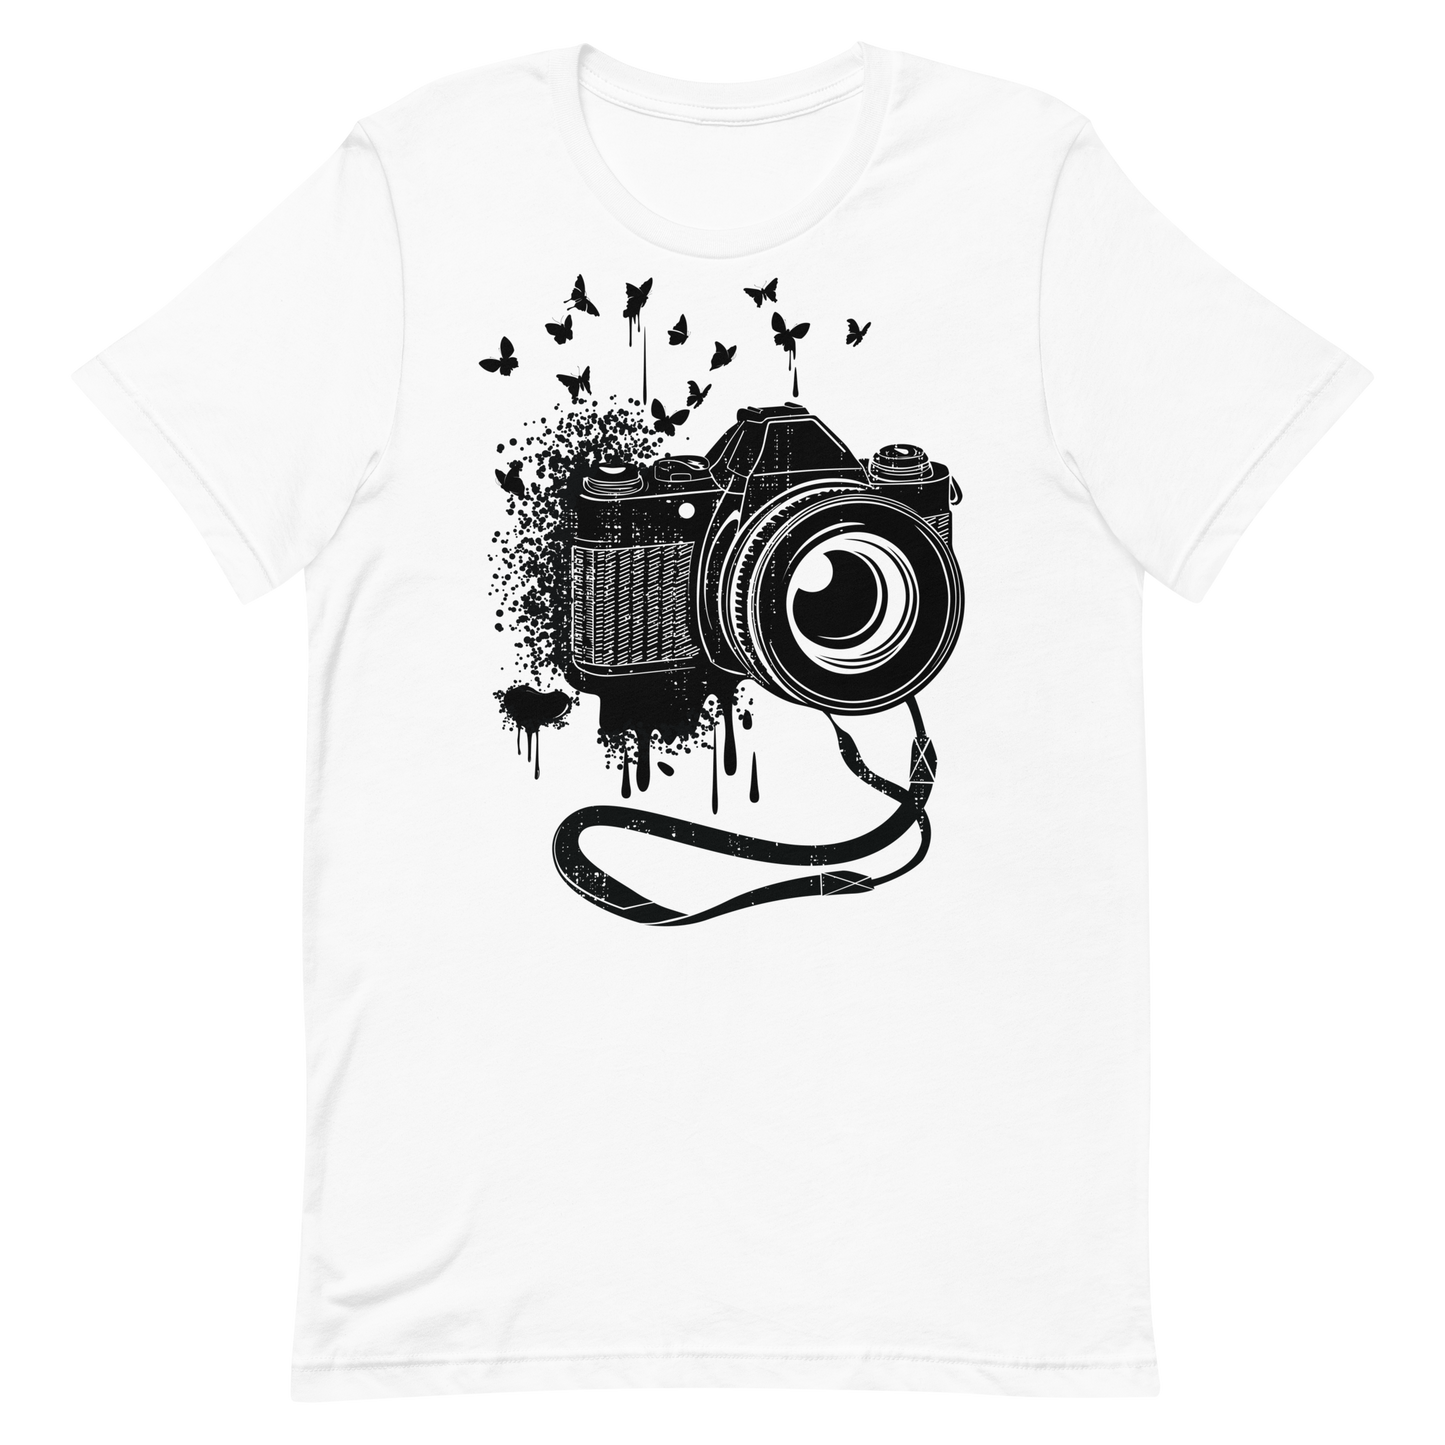 Retro Unisex T-Shirt - Vintage Camera and Butterflies White